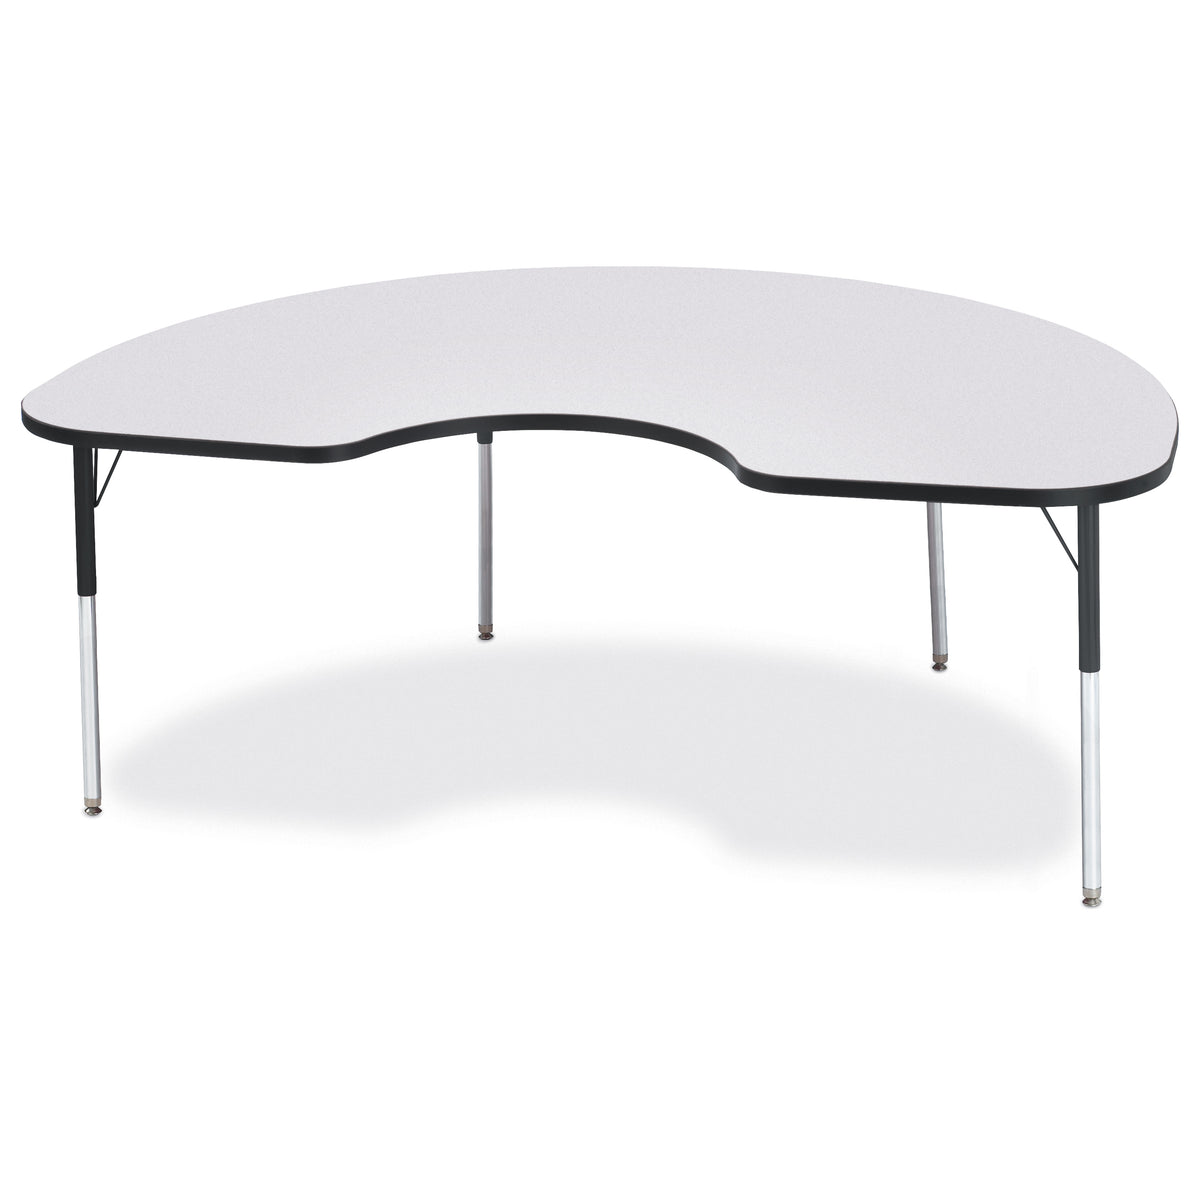 6423JCA180, Berries Kidney Activity Table - 48" X 72", A-height - Freckled Gray/Black/Black